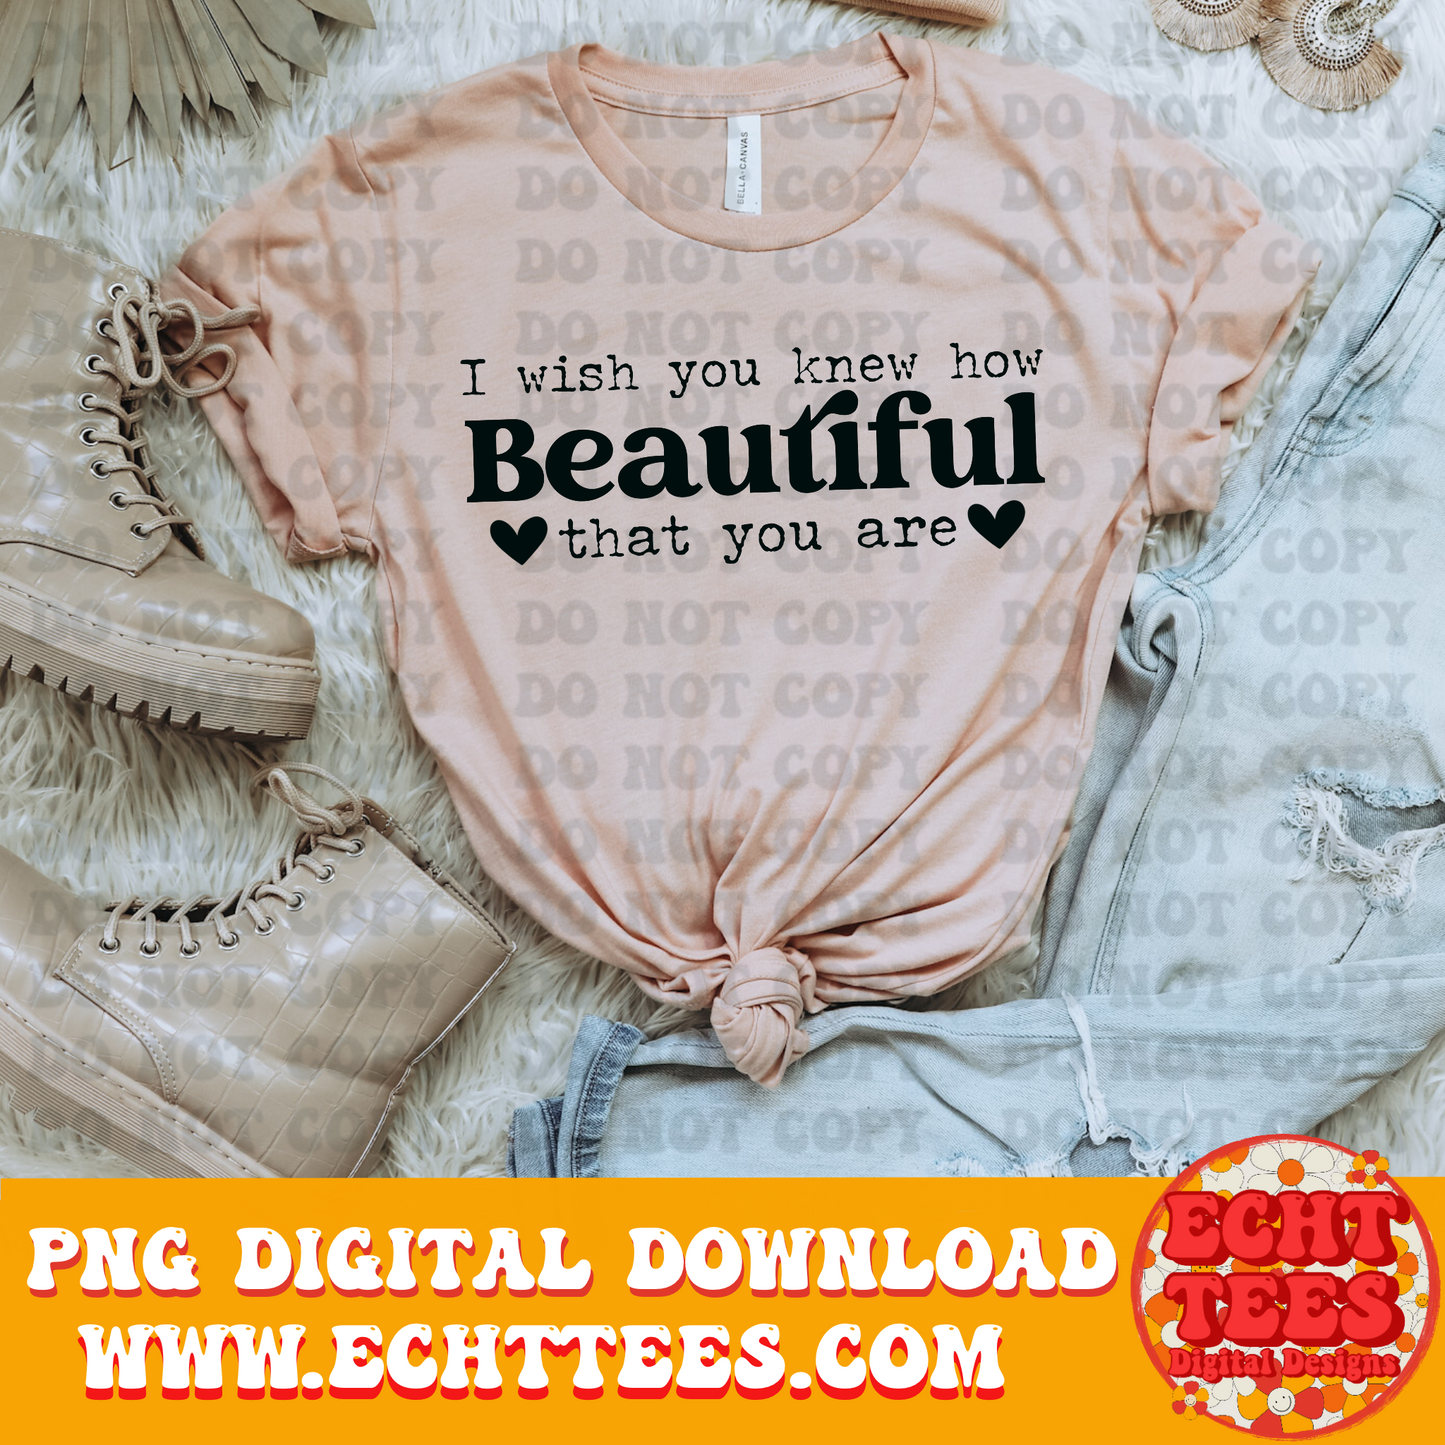 I wish you knew how beautiful that you are PNG Digital Download